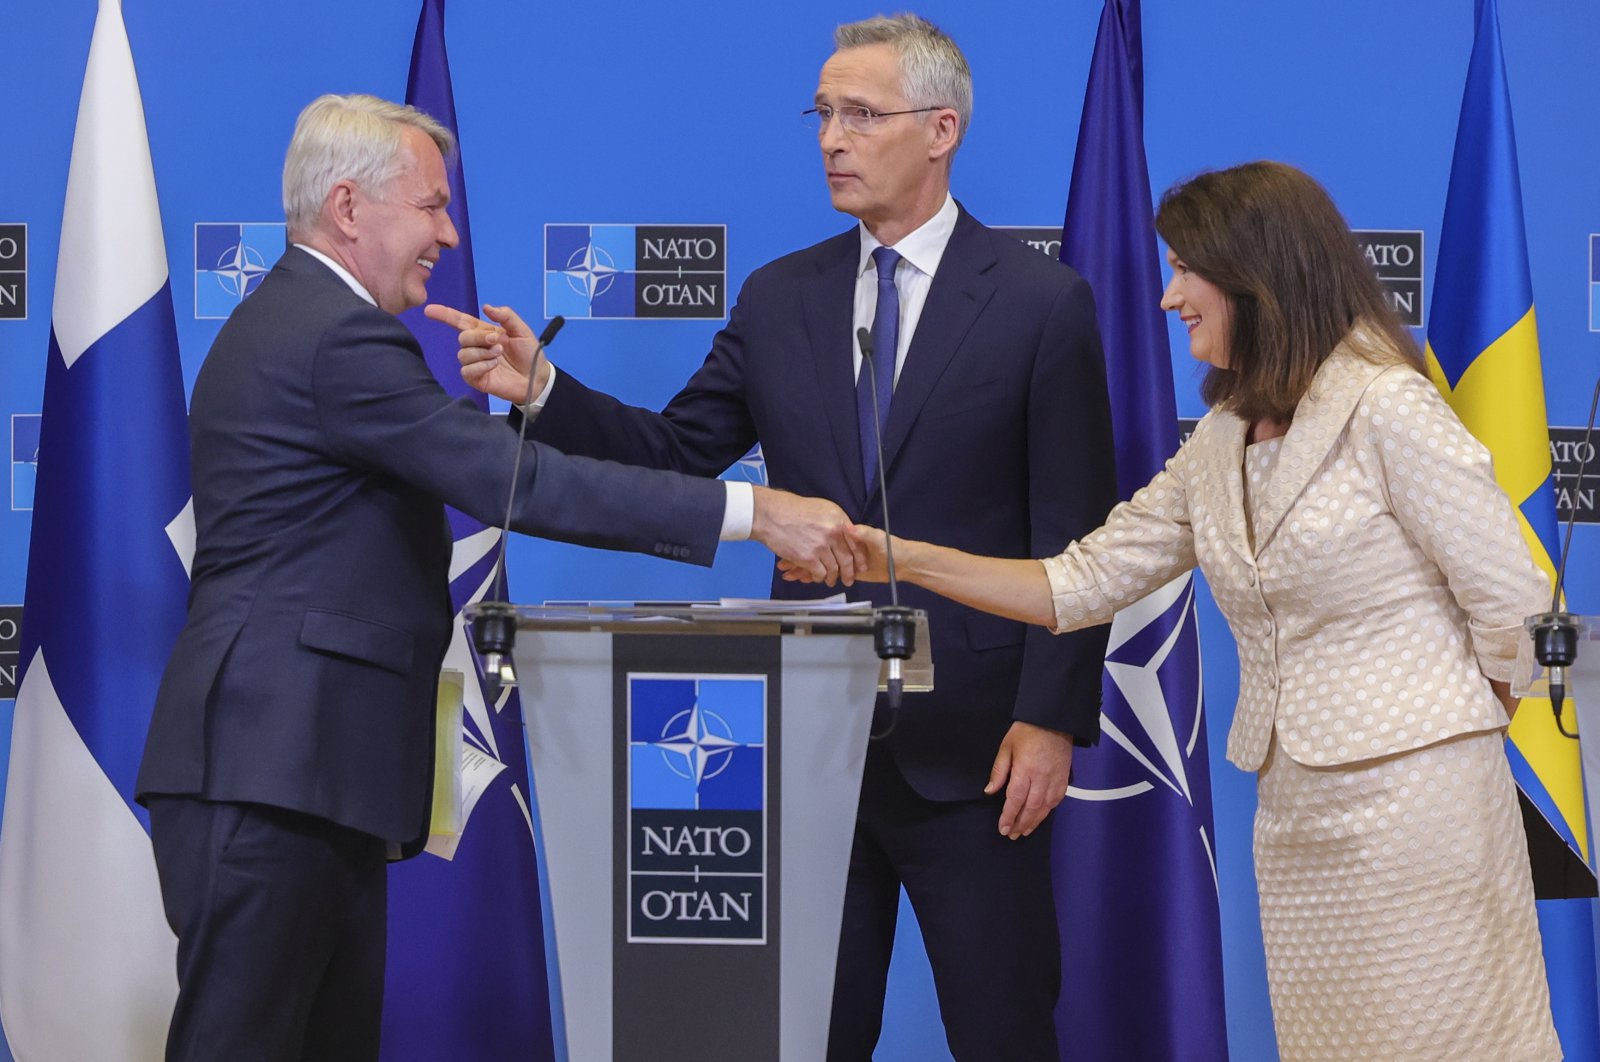 Finland&#039;s Foreign Minister Pekka Haavisto, left, Sweden&#039;s Foreign Minister Ann Linde, right, and NATO Secretary-General Jens Stoltenberg attend a media conference after the signature of the NATO Accession Protocols for Finland and Sweden in the NATO headquarters in Brussels, Tuesday, July 5, 2022. (AP Photo/Olivier Matthys)